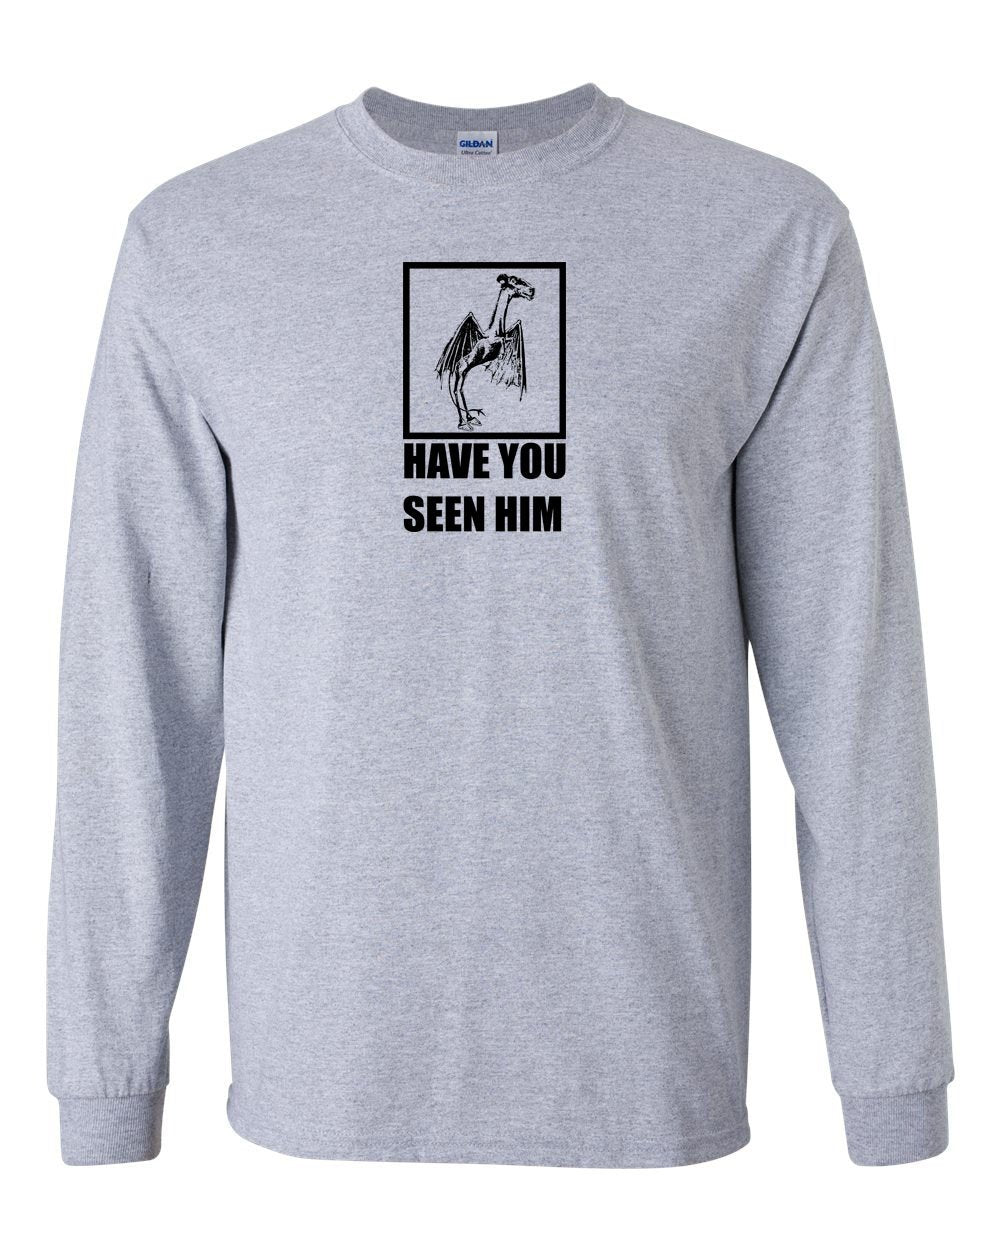 Have You Seen Him? MENS Long Sleeve Heavy Cotton T-Shirt